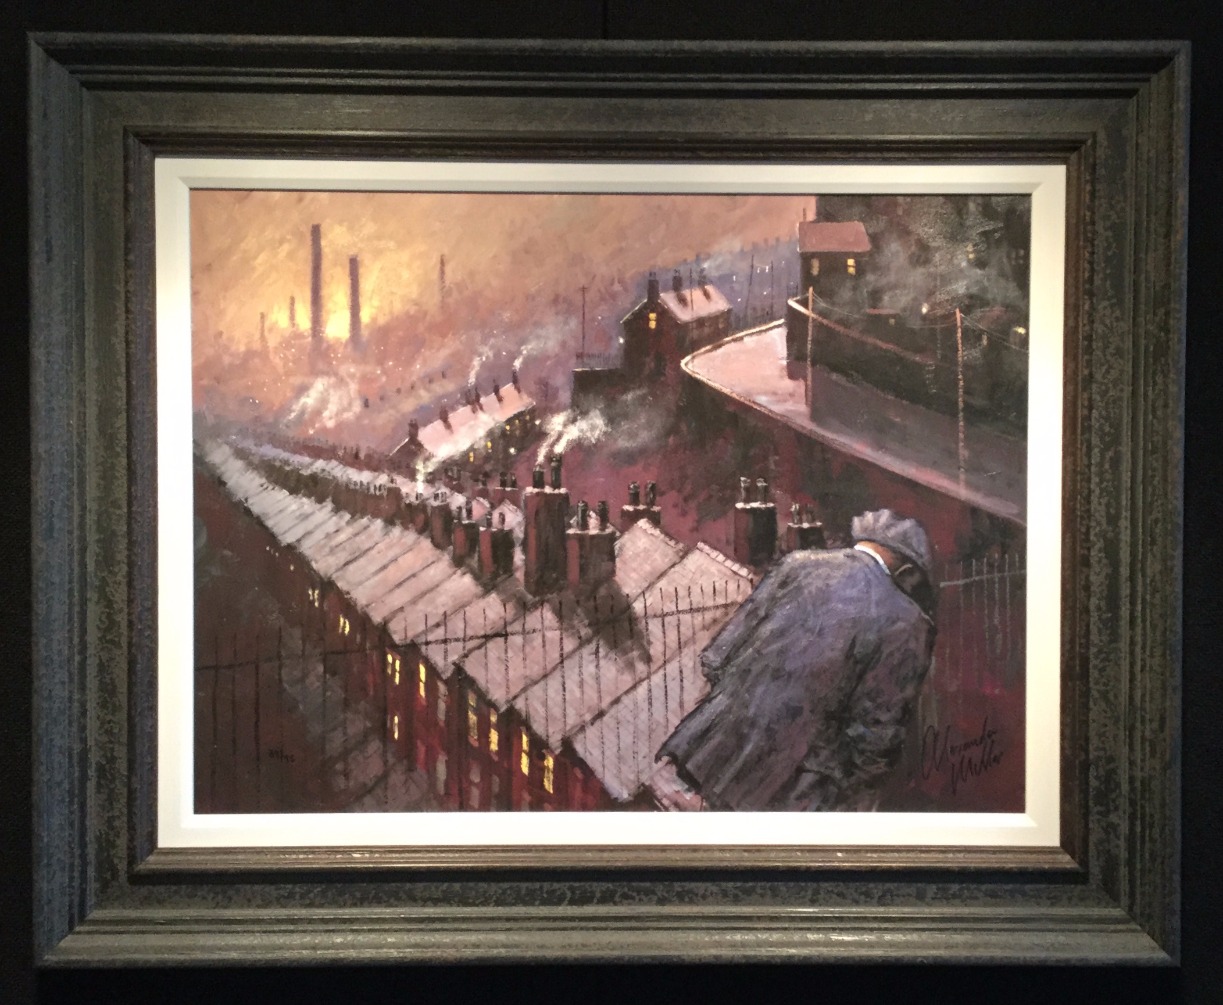 A Long and Winding Road by Alexander Millar, Industrial | Landscape | Northern | Nostalgic | Gadgie